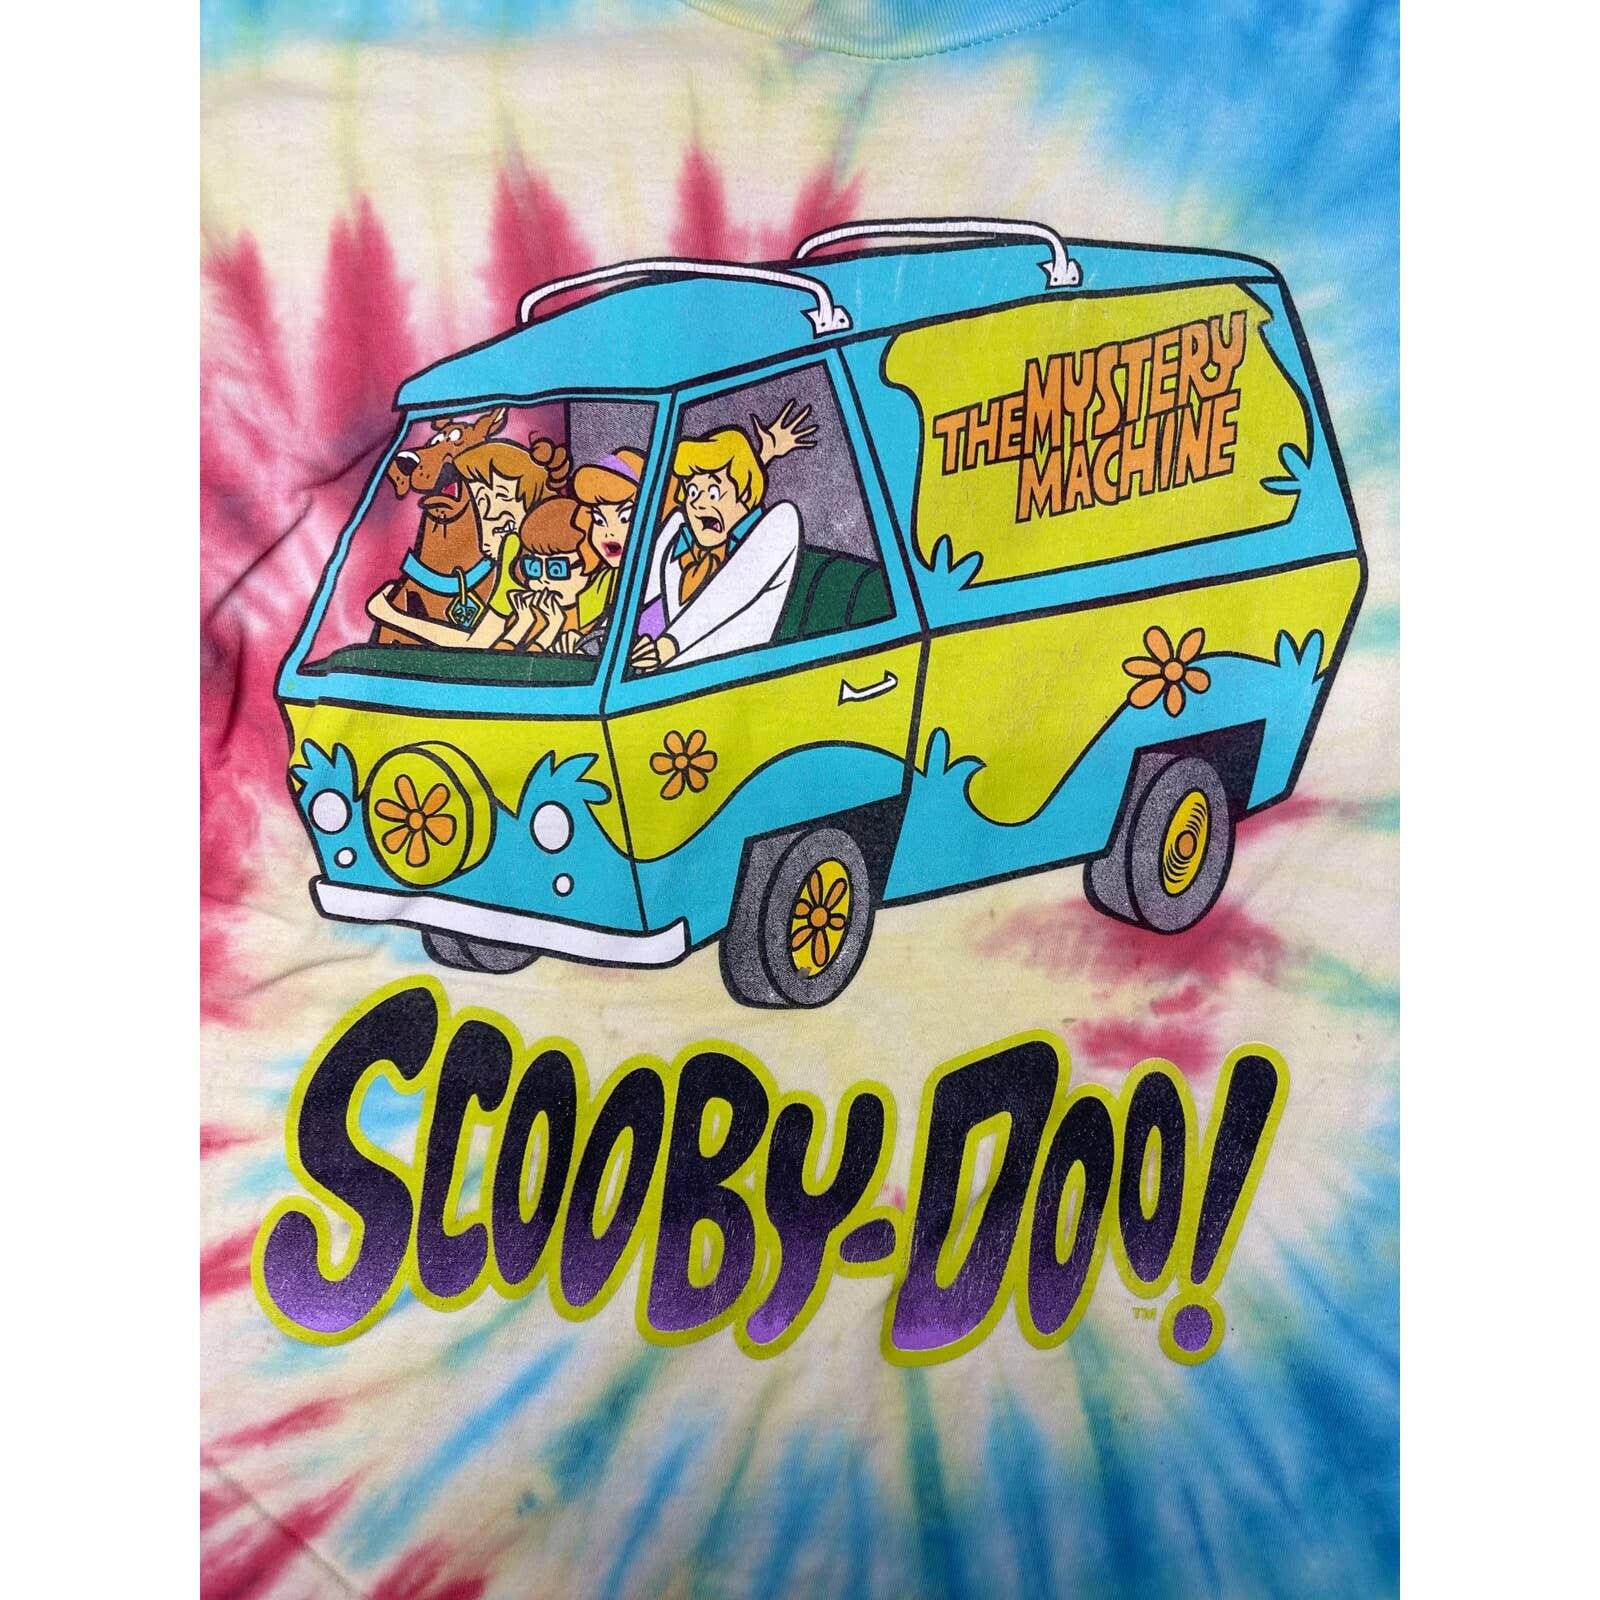 1 Scooby Doo Tie Dyed T shirt size s, mystery machine, ghost Size US S / EU 44-46 / 1 - 2 Preview